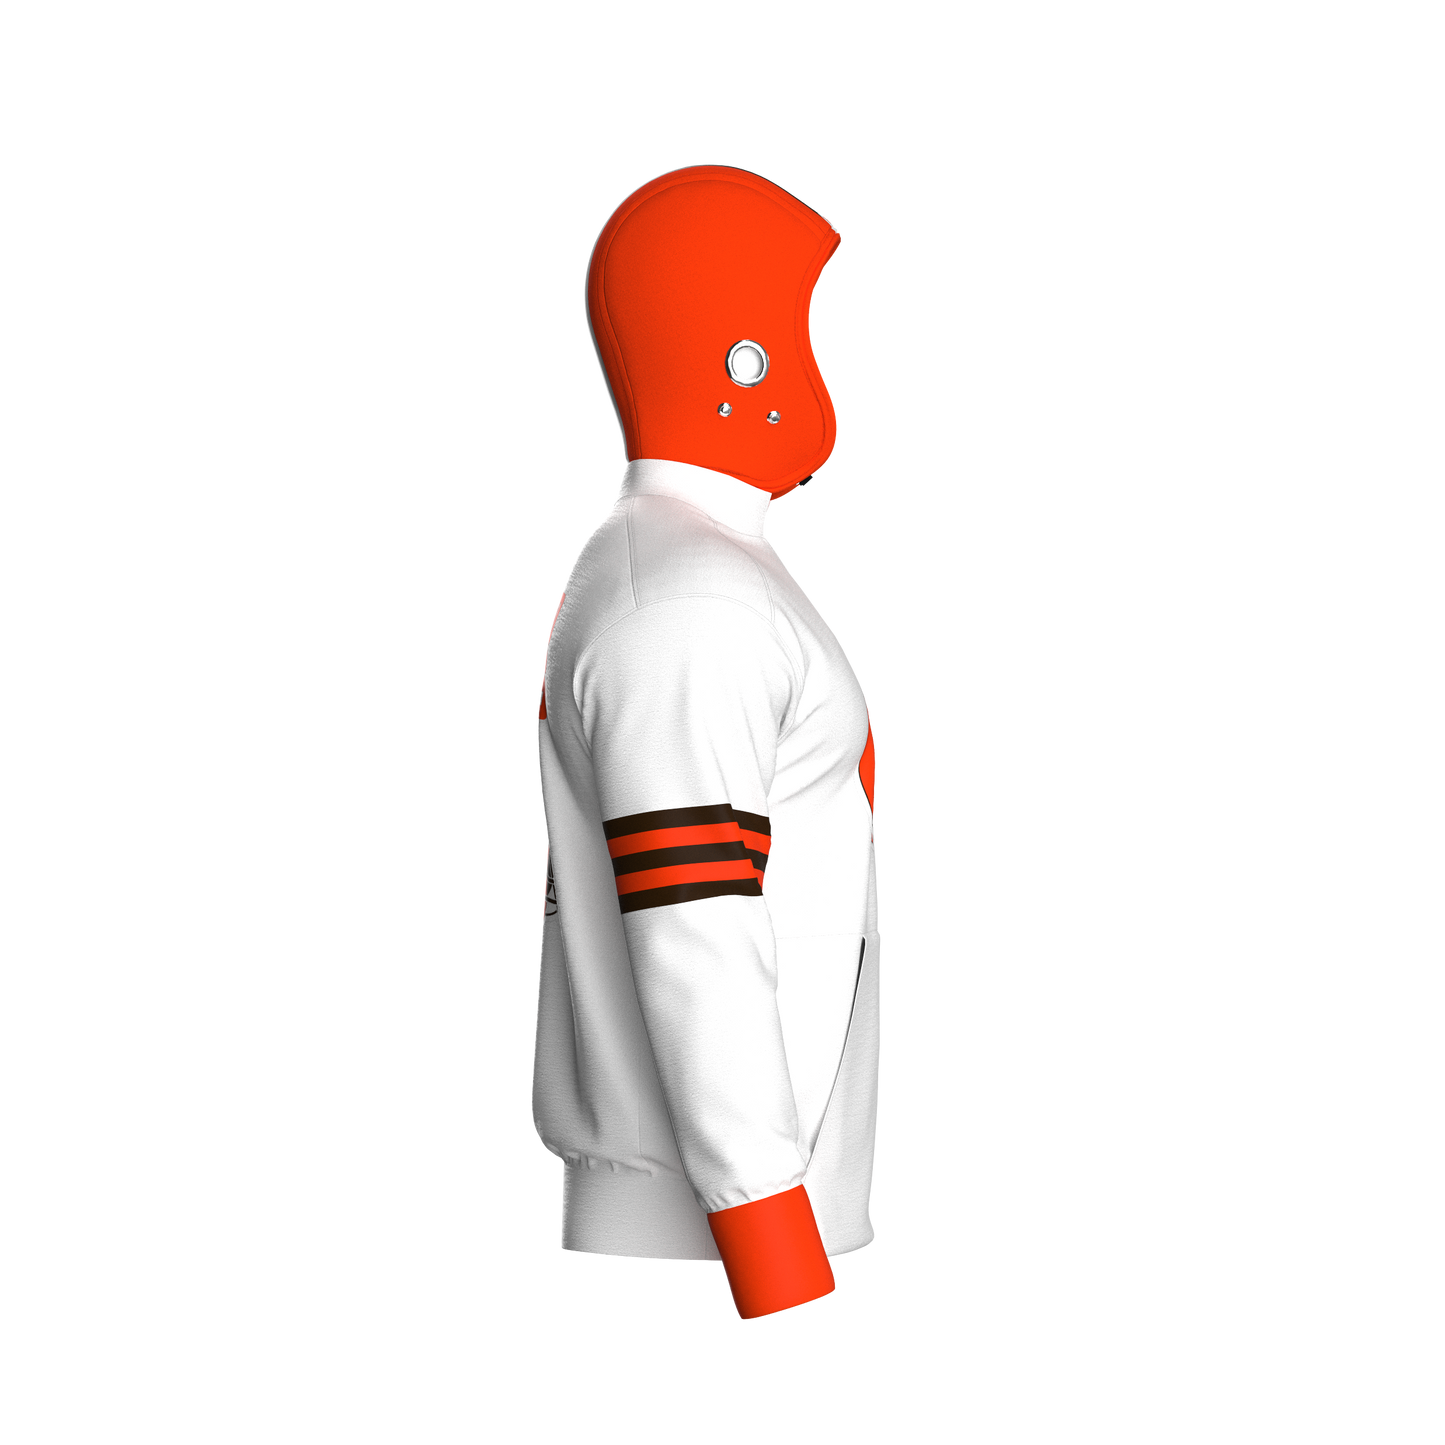 Cleveland Browns Away Pullover (youth)